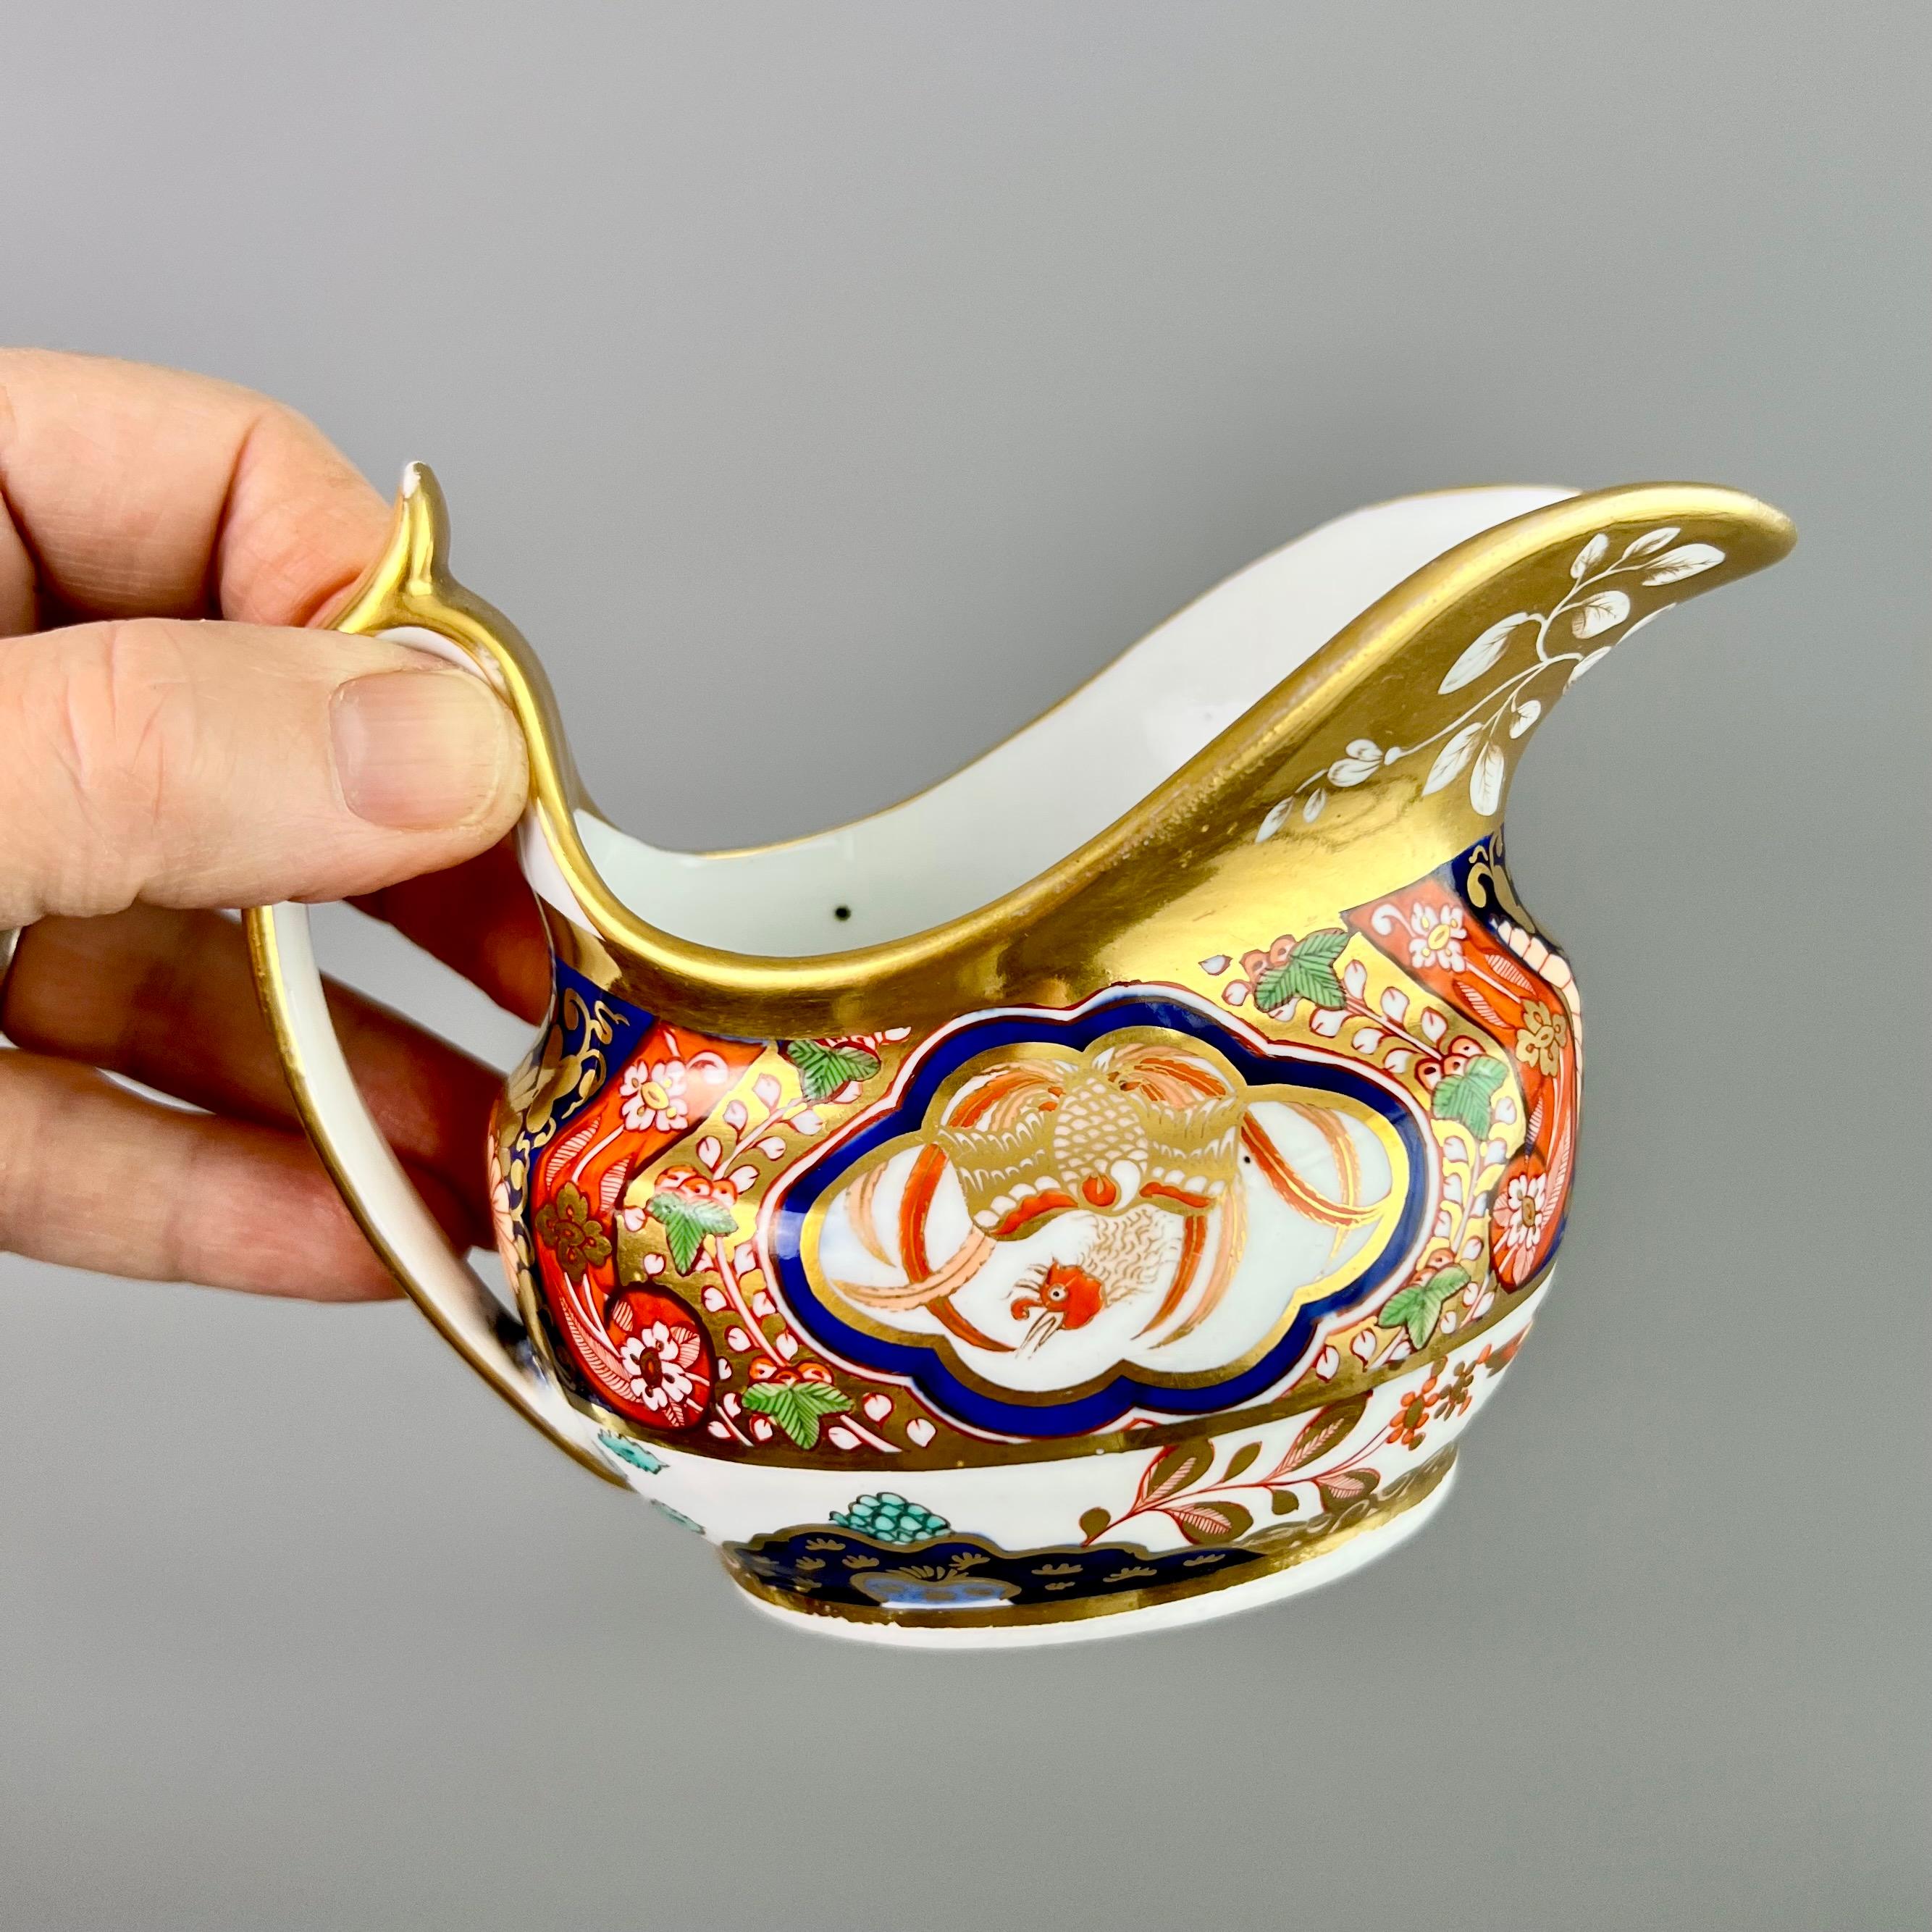 This is a beautiful milk jug or creamer made by Spode around 1808. The jug is decorated in a richly gilded Imari pattern that has also been seen on Nantgarw porcelain, with beautiful birds.

Josiah Spode was the great pioneer among the Georgian